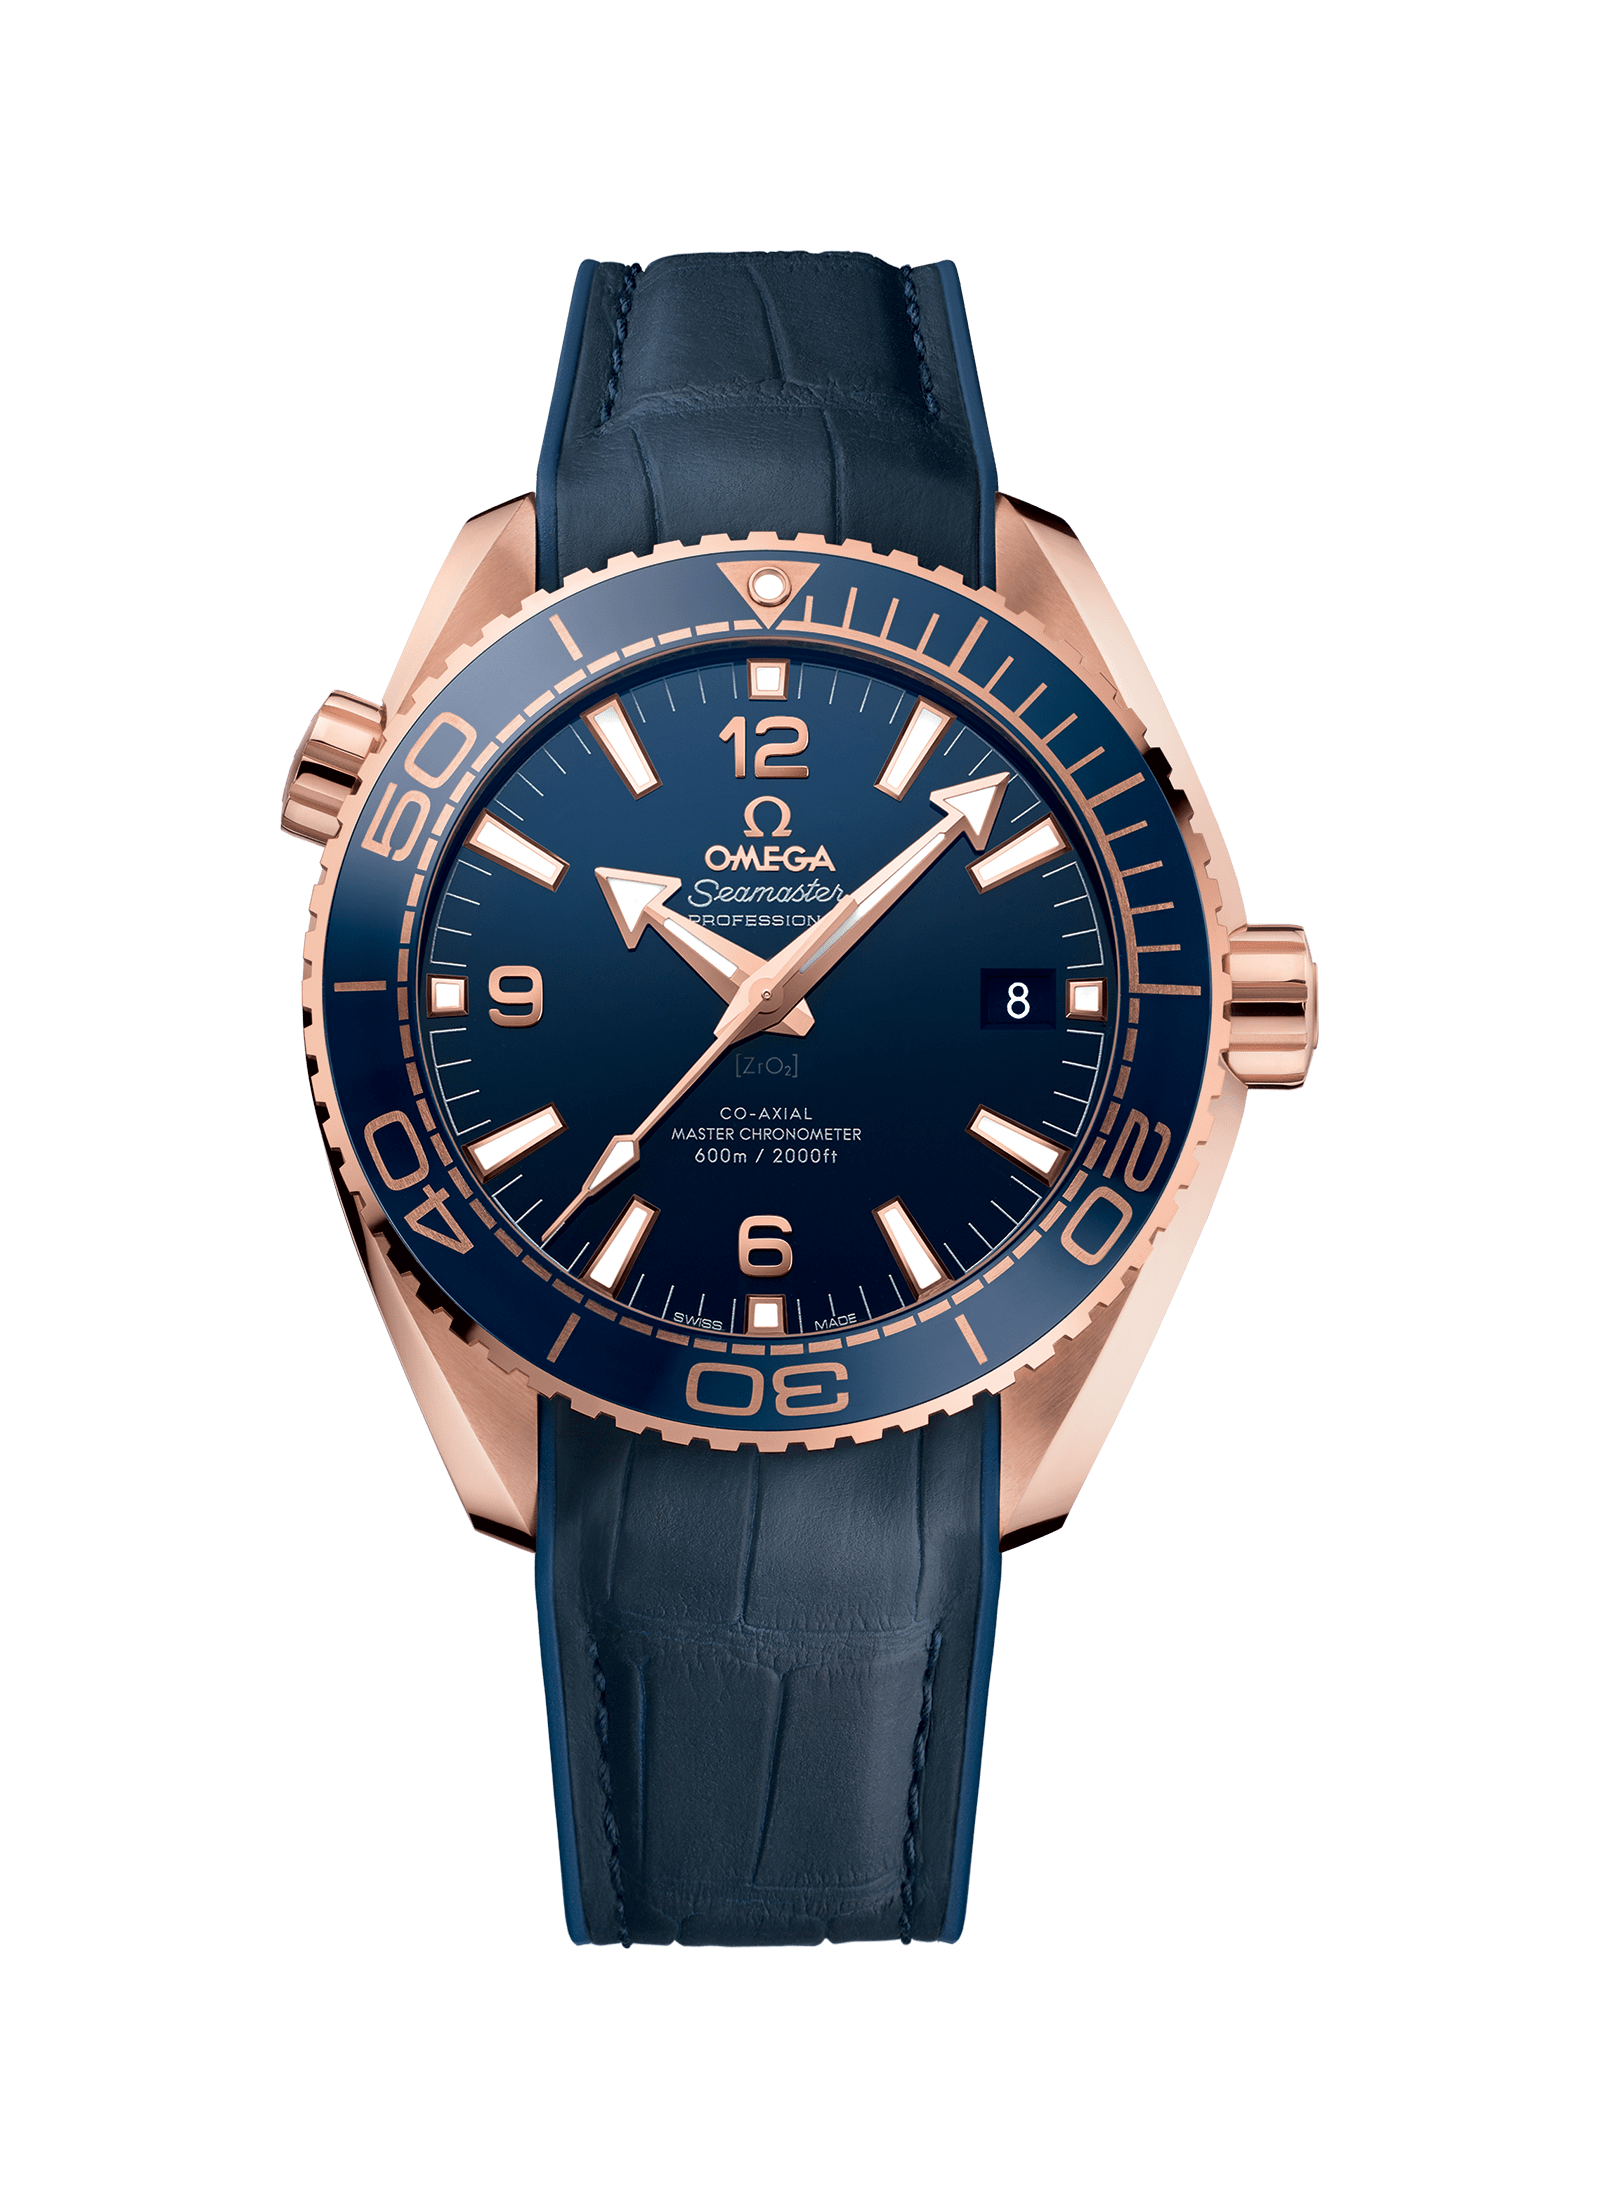 Men's watch / unisex  OMEGA, DIVER 600M CO‑AXIAL MASTER CHRONOMETER / 42mm, SKU: 215.63.44.21.03.001 | watchapproach.com